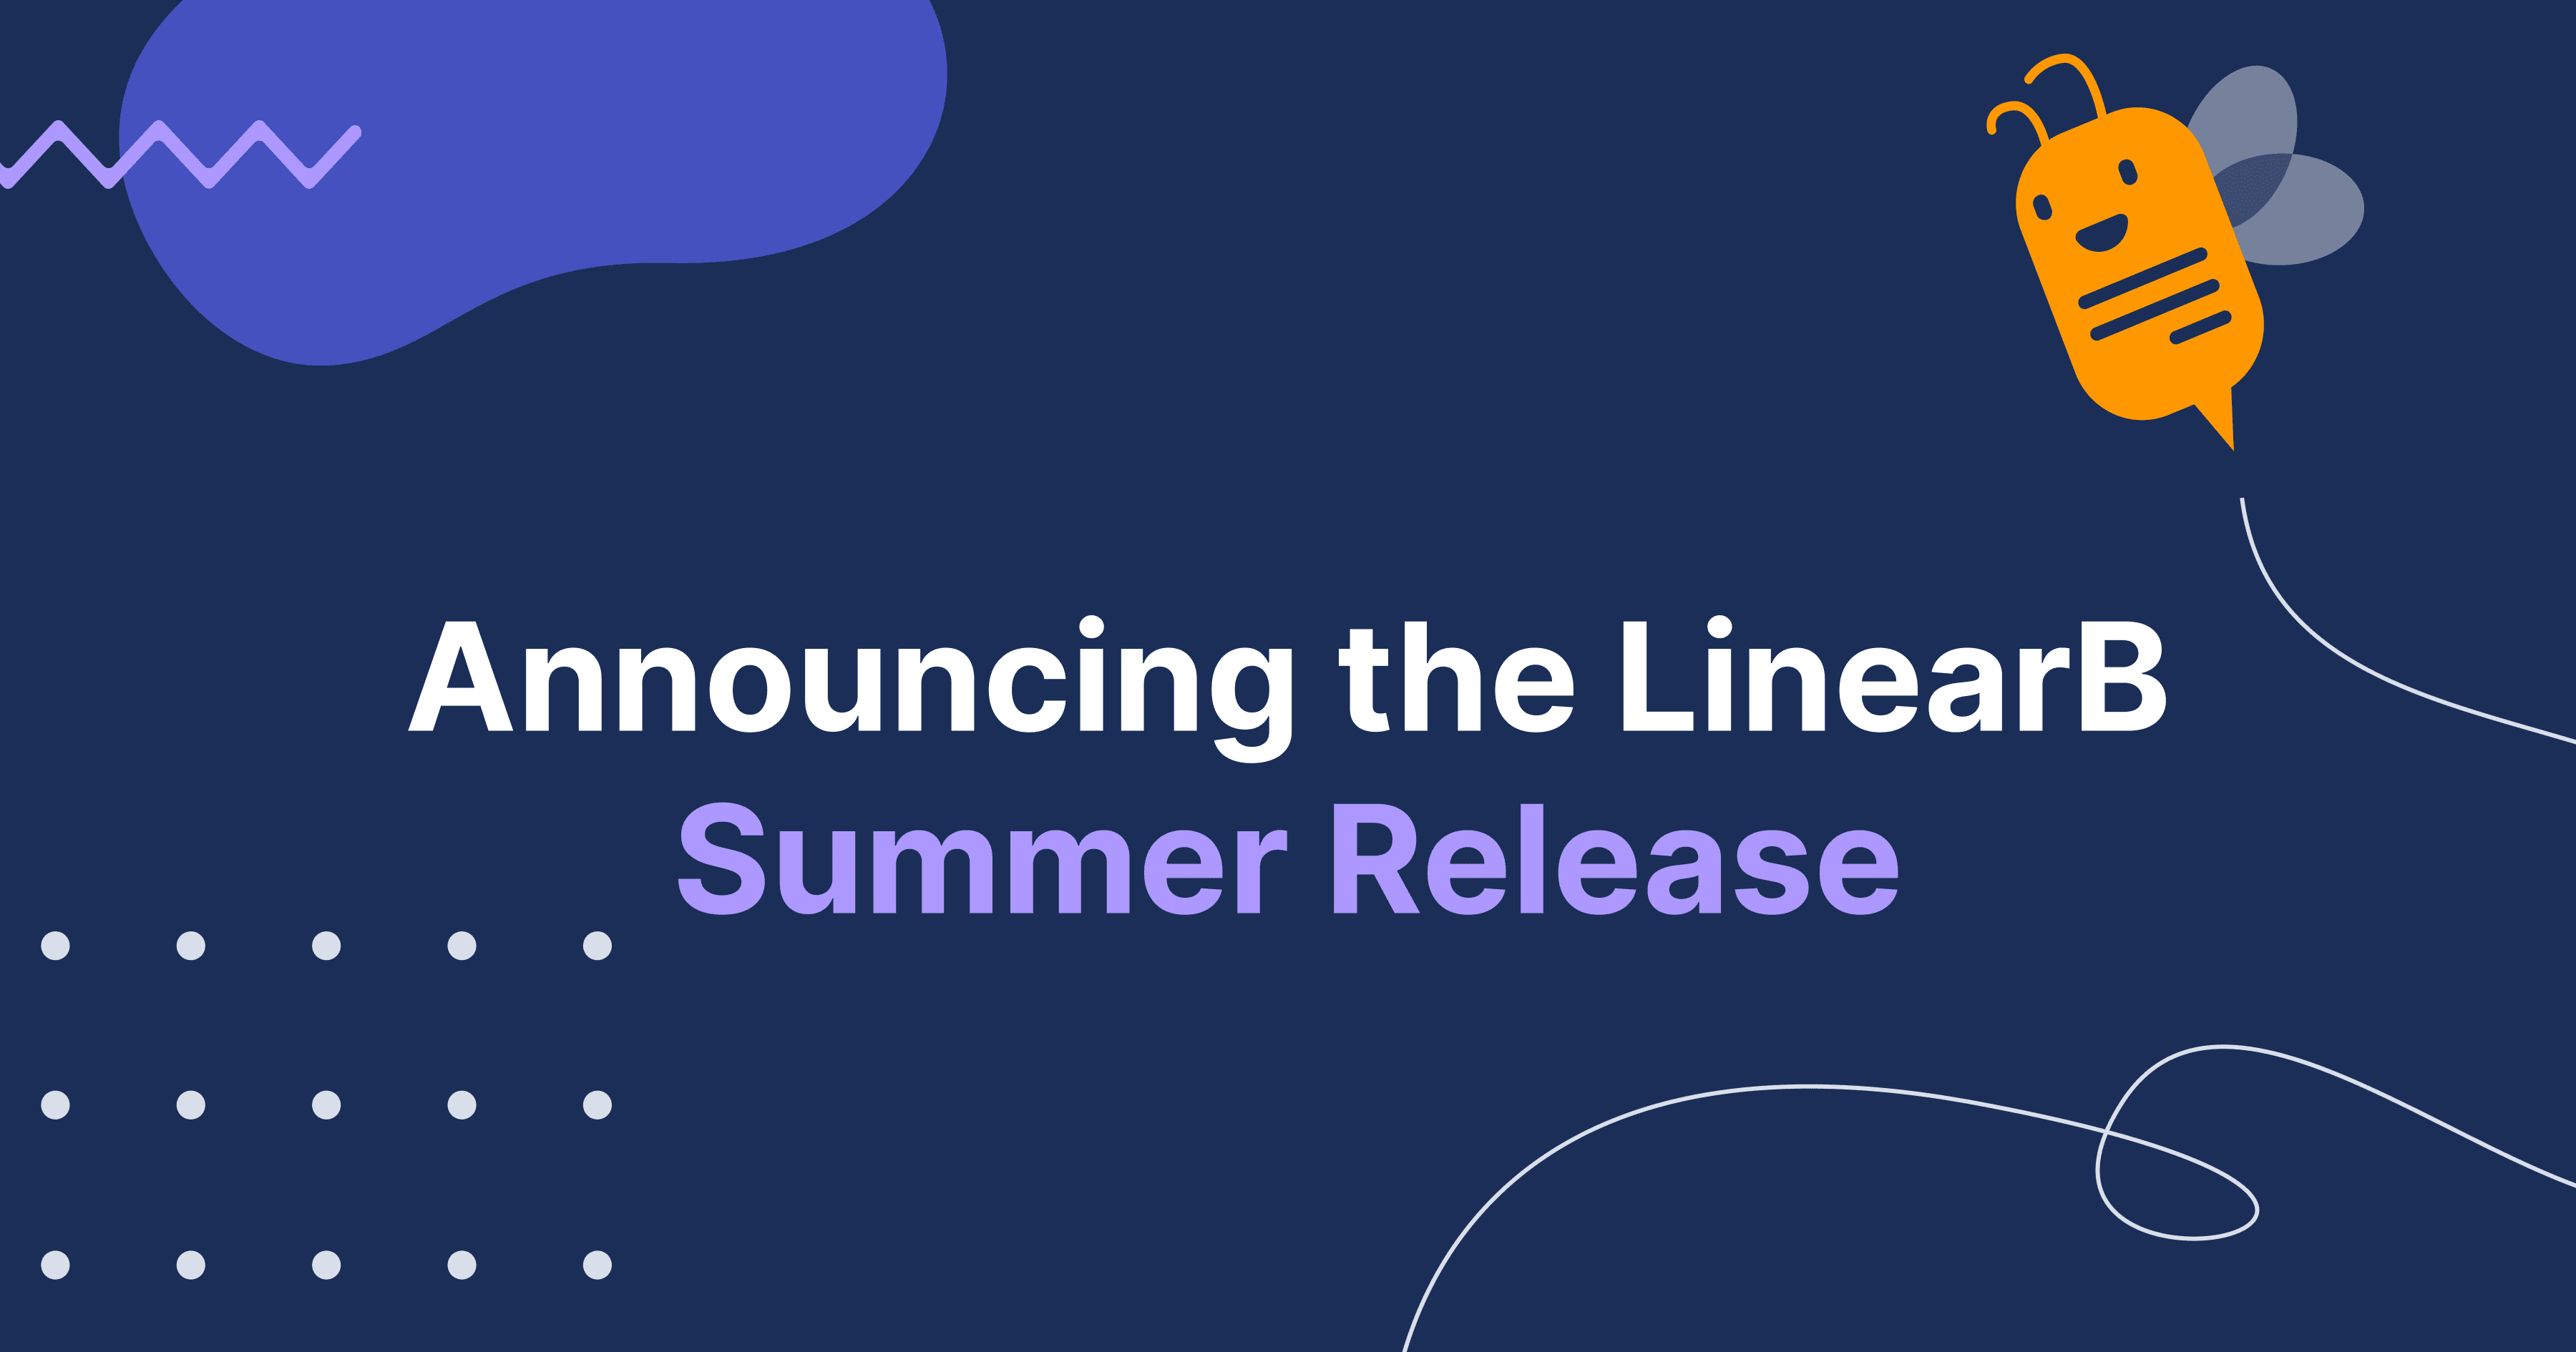 Announcing the Summer Launch of LinearB